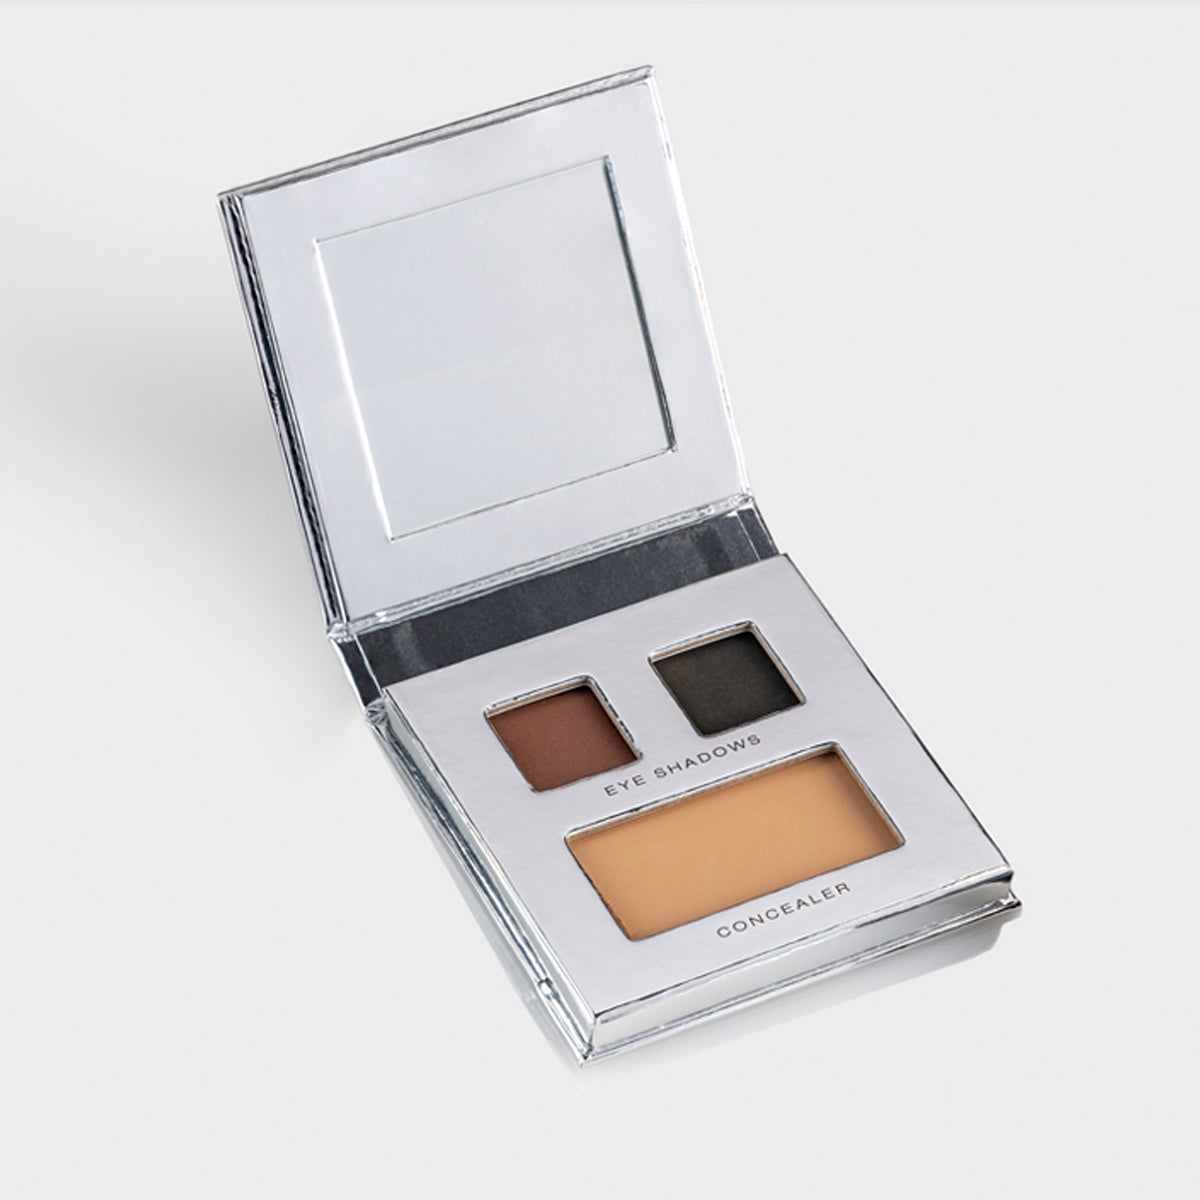 Fold Out Eyes Palette with Brown & Black Eyeshadow with concealer. Includes a mirror.